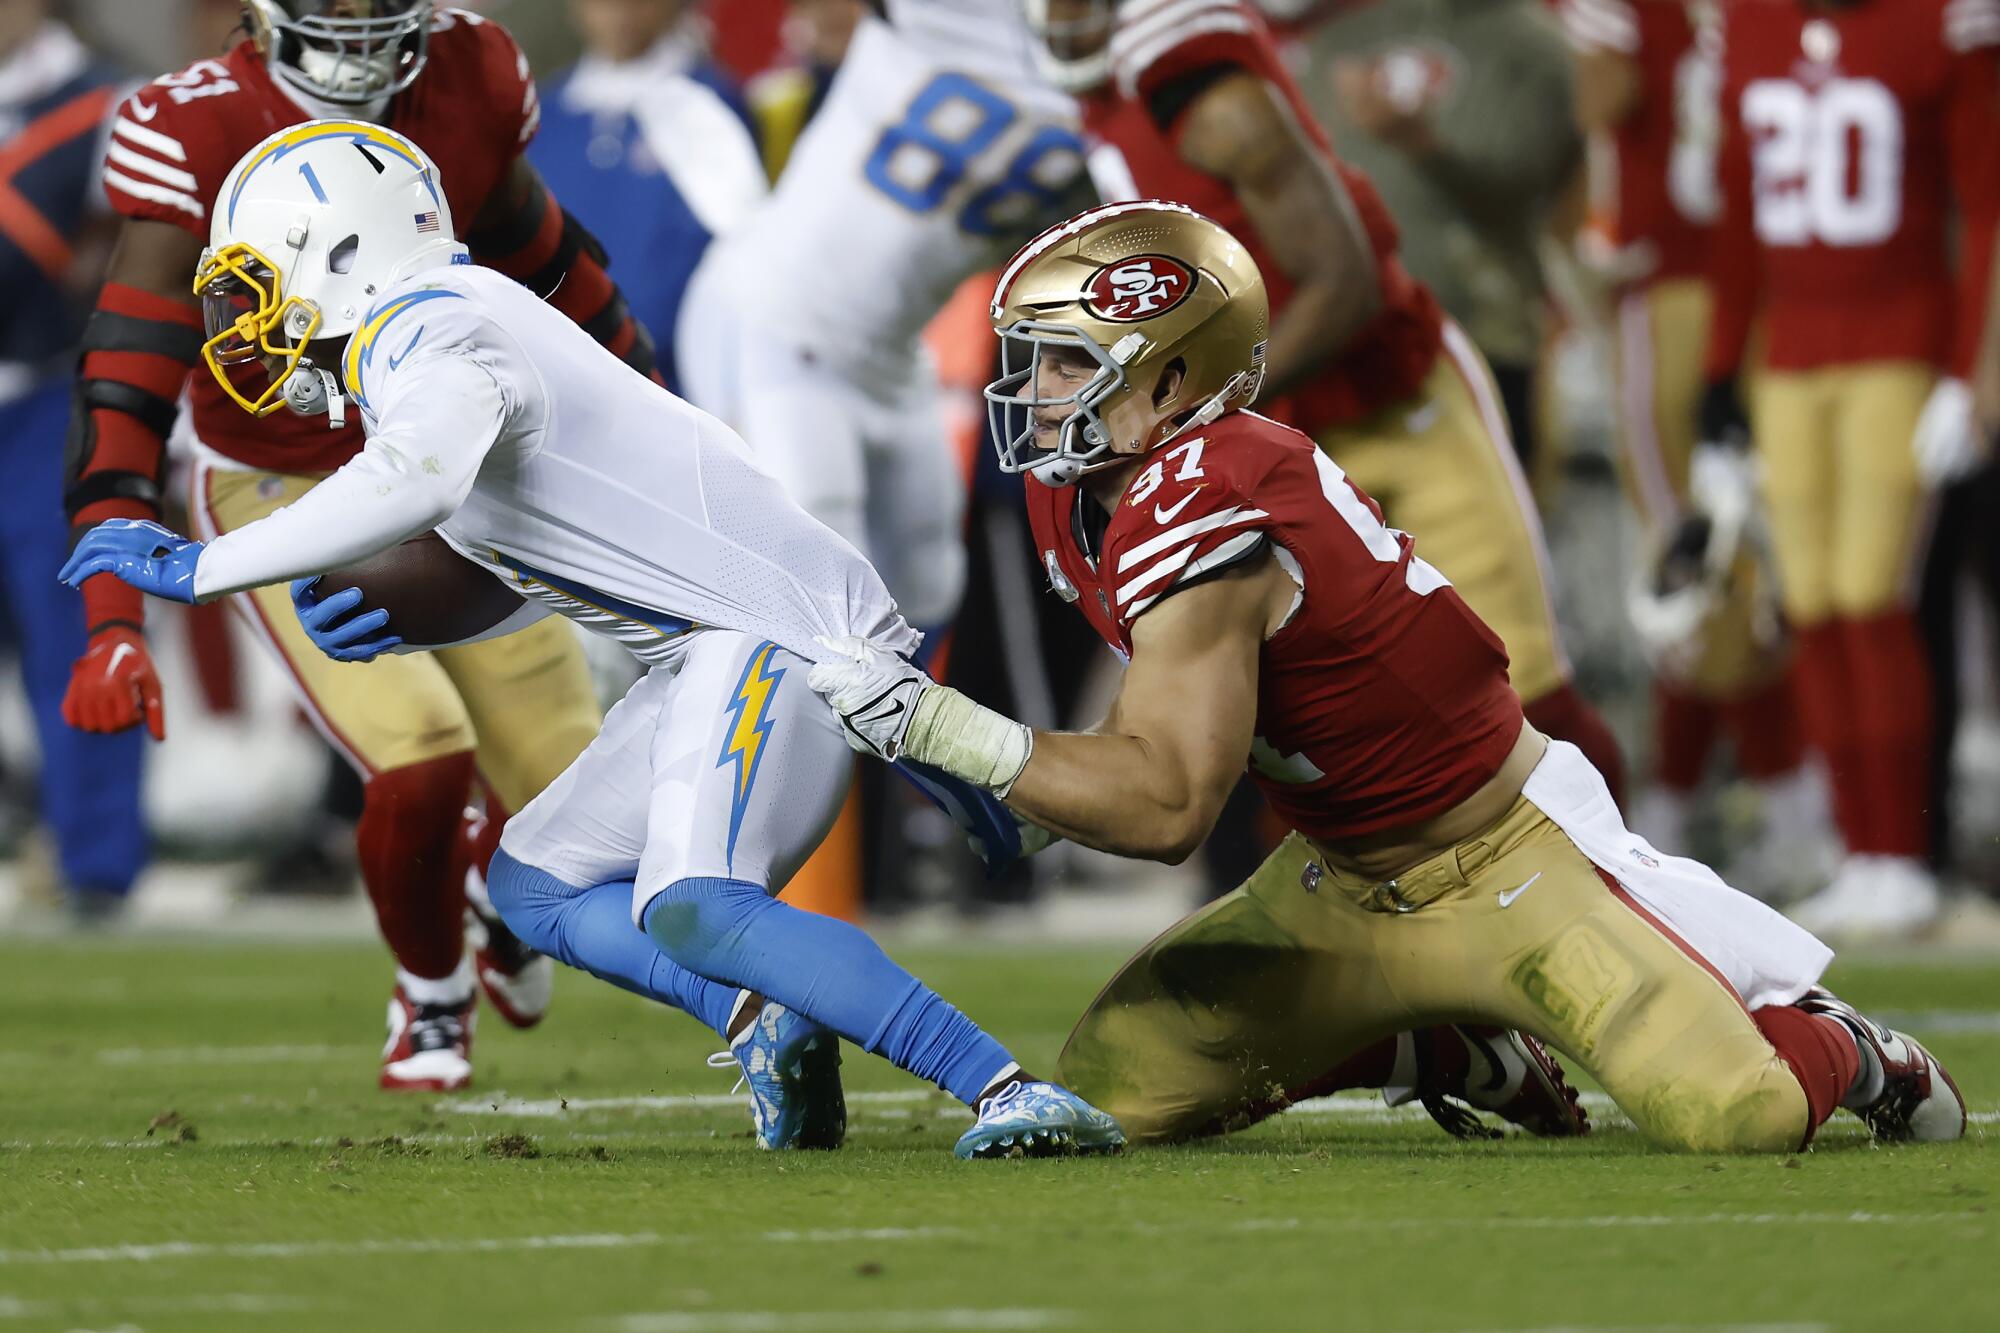 San Francisco 49ers defensive end Nick Bosa brings down Chargers wide receiver DeAndre Carter.